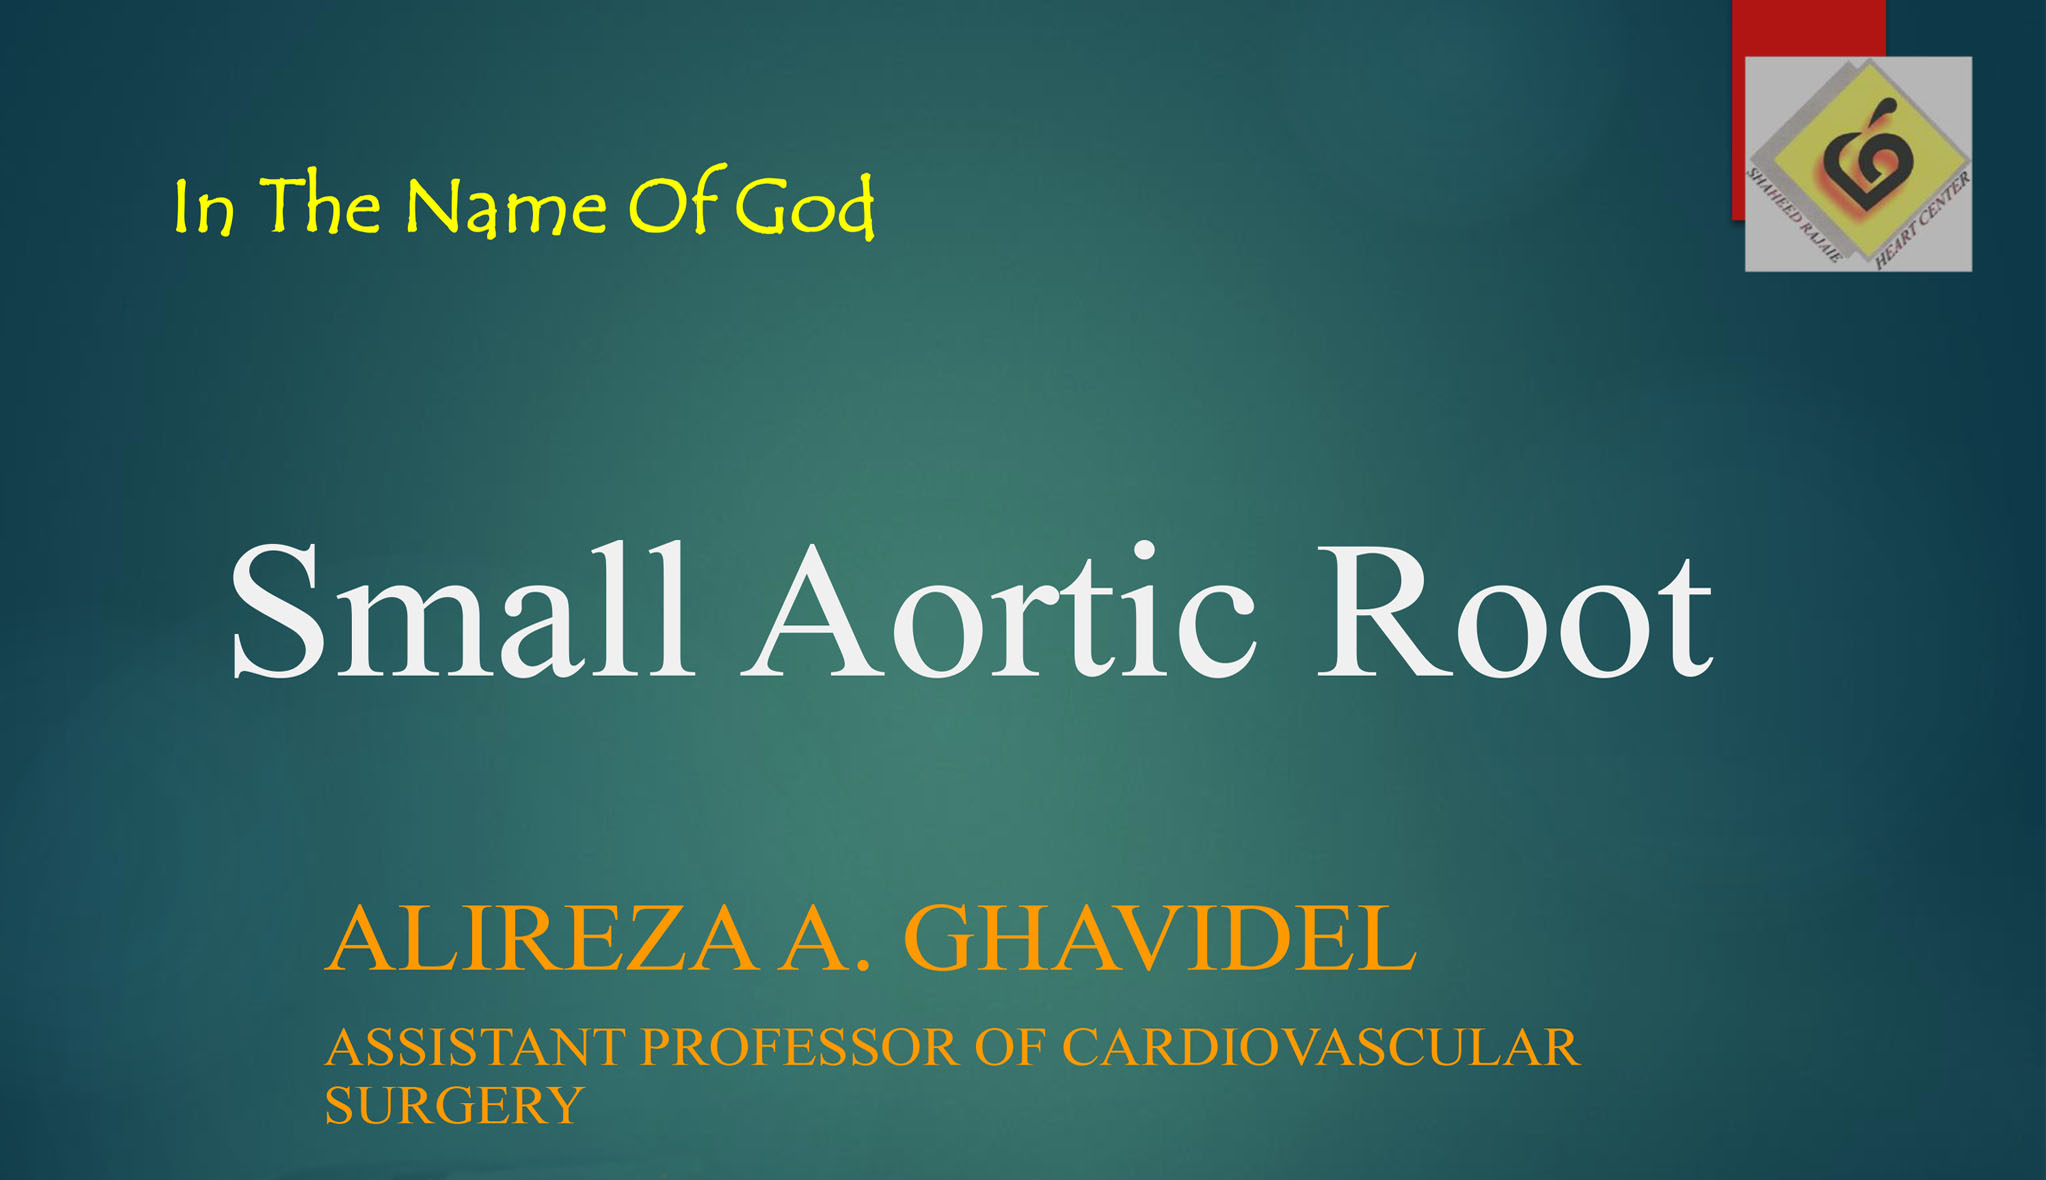 Small Aortic Root